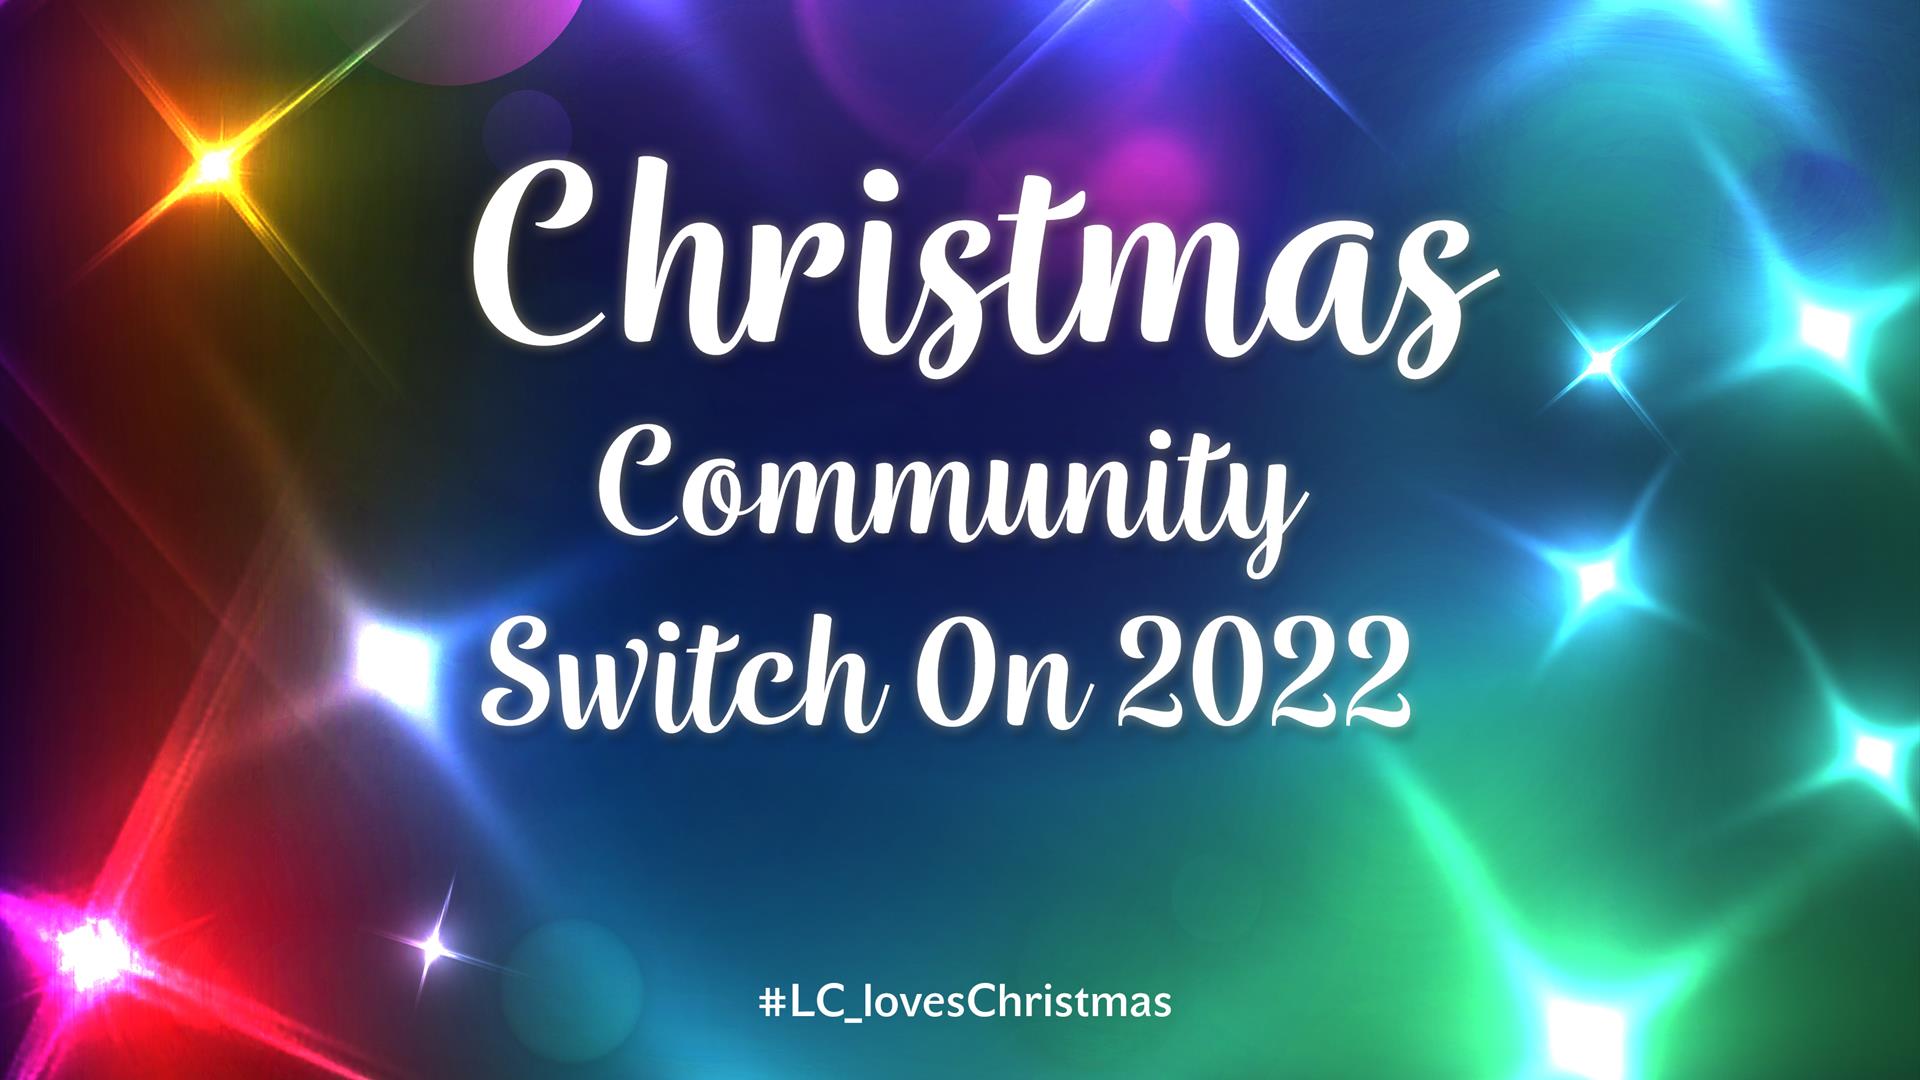 Poster image with brightly coloured Christmas lights with words in centre reading 'Christmas Community Switch On 2022'